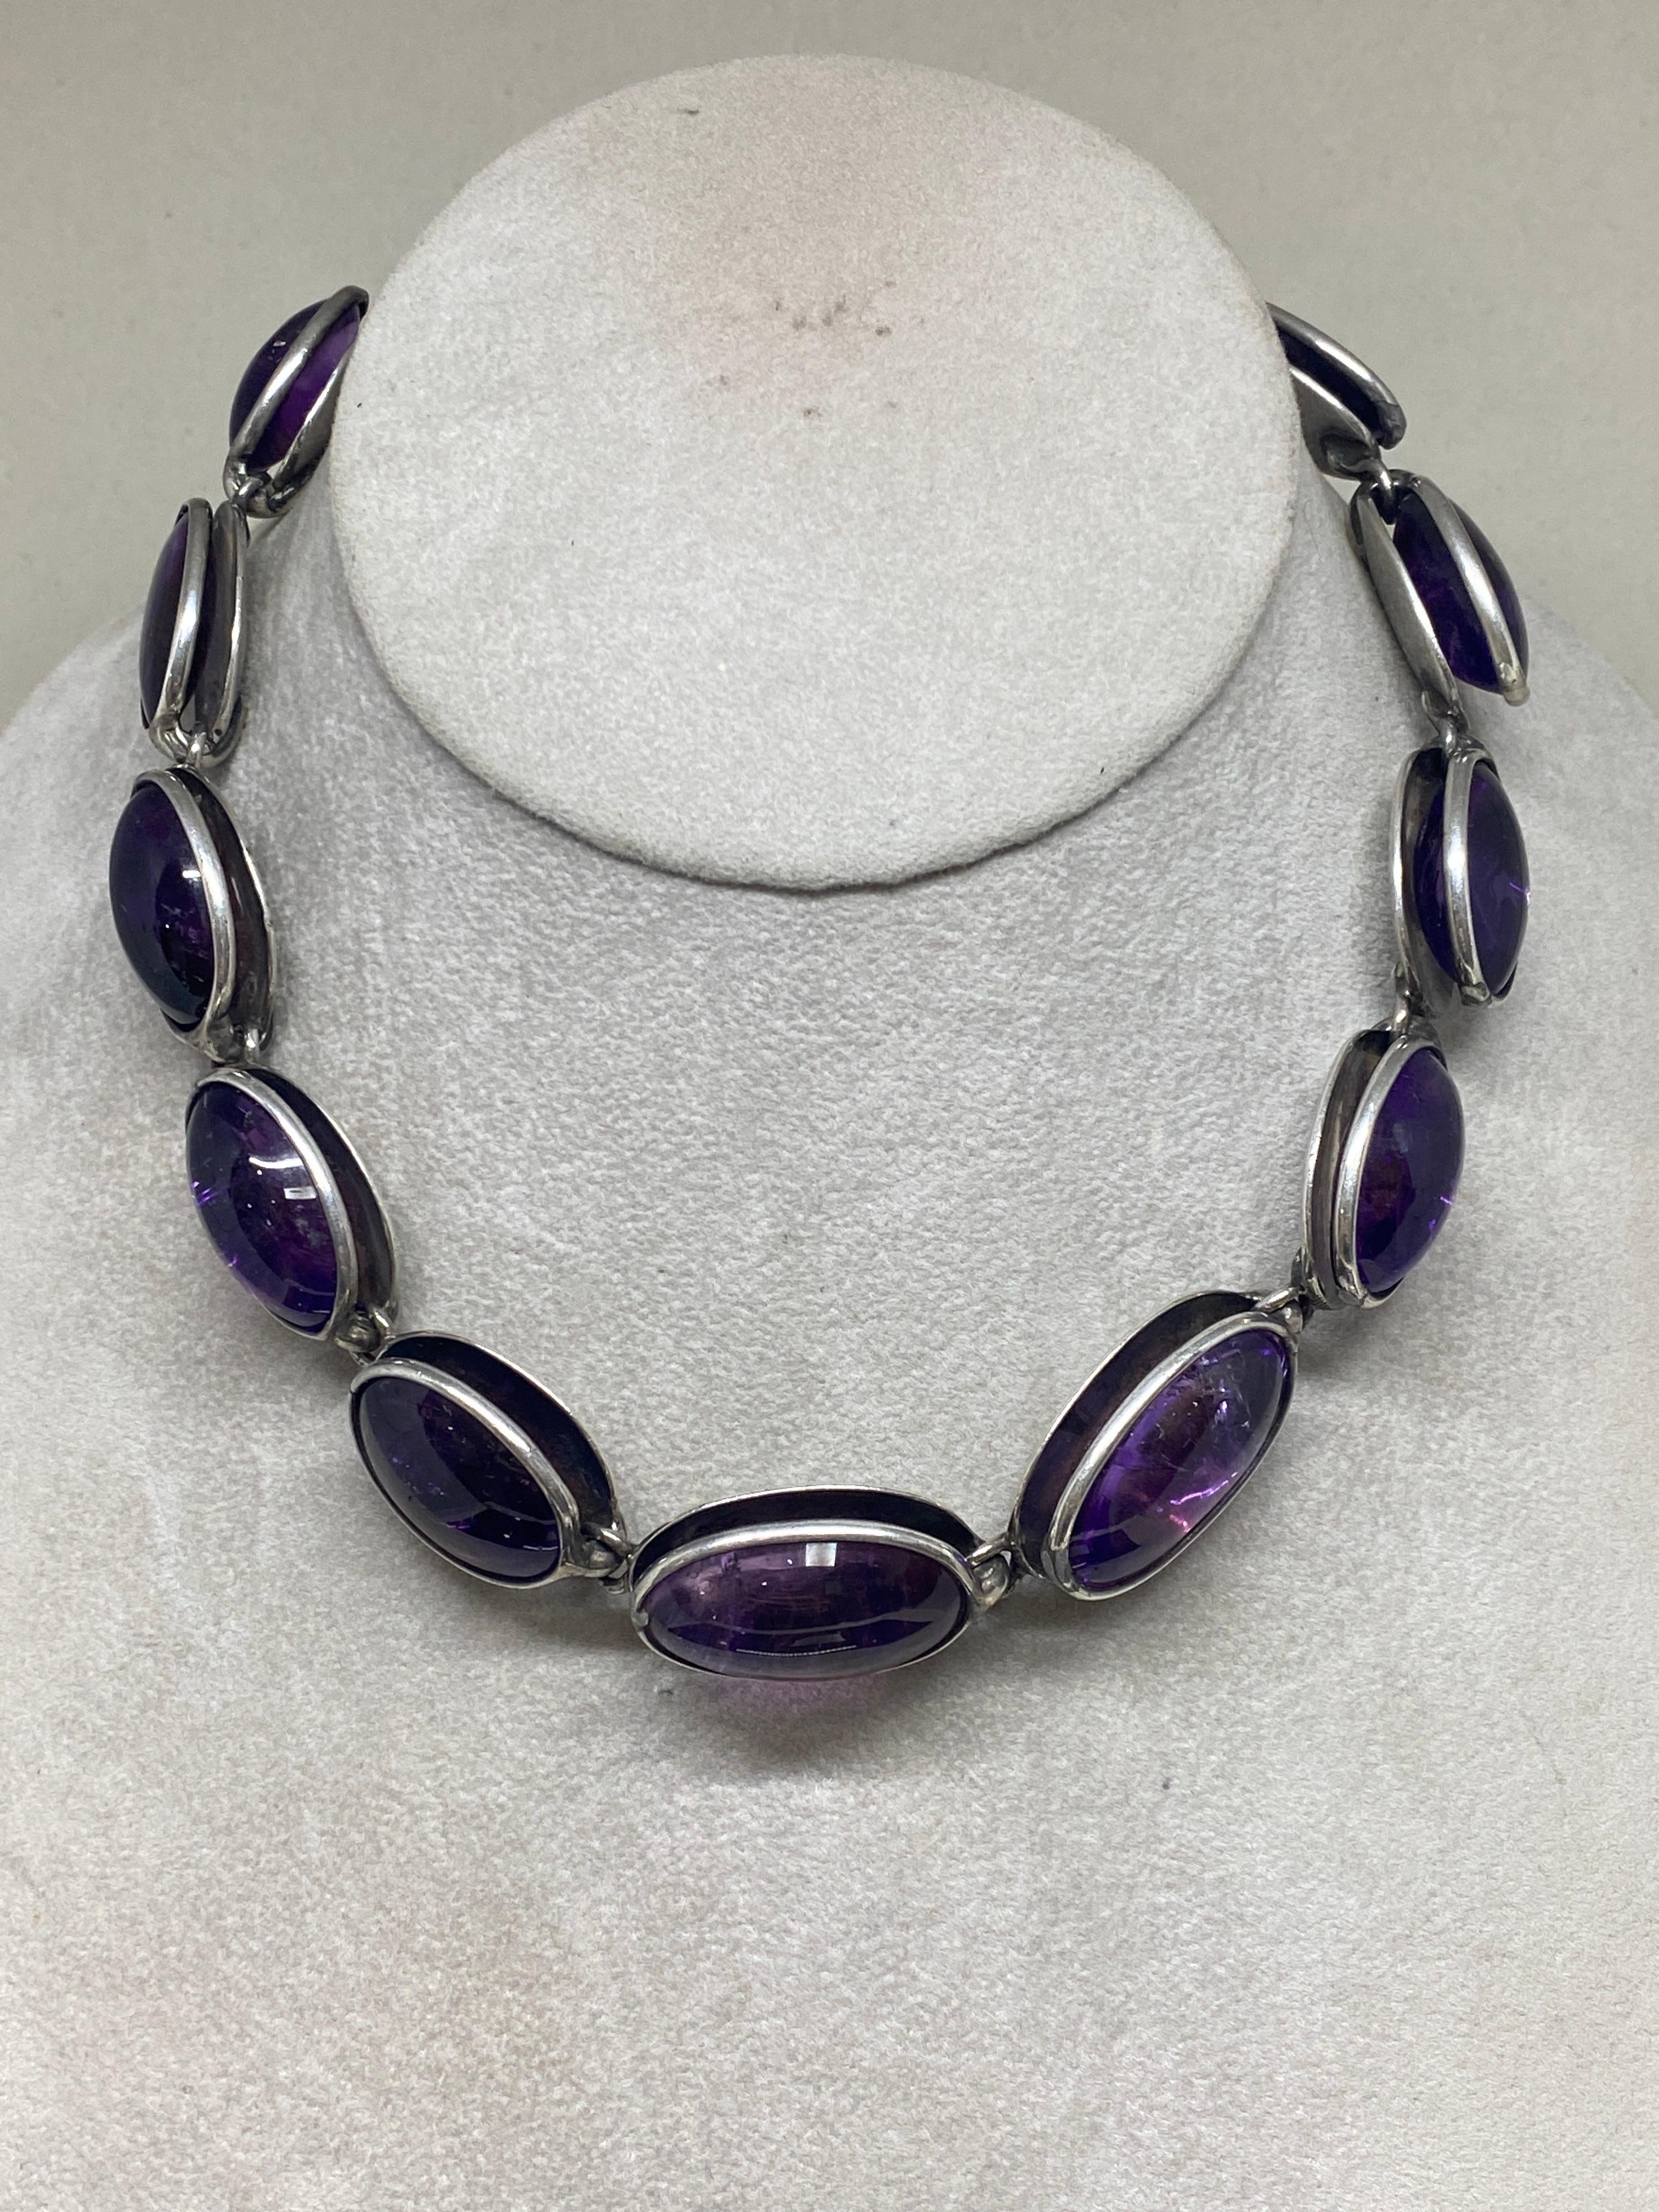 Vintage Mexico Modernist 1950’s Antonia Pineda 970 Silver & Amethyst Necklace  For Sale 6